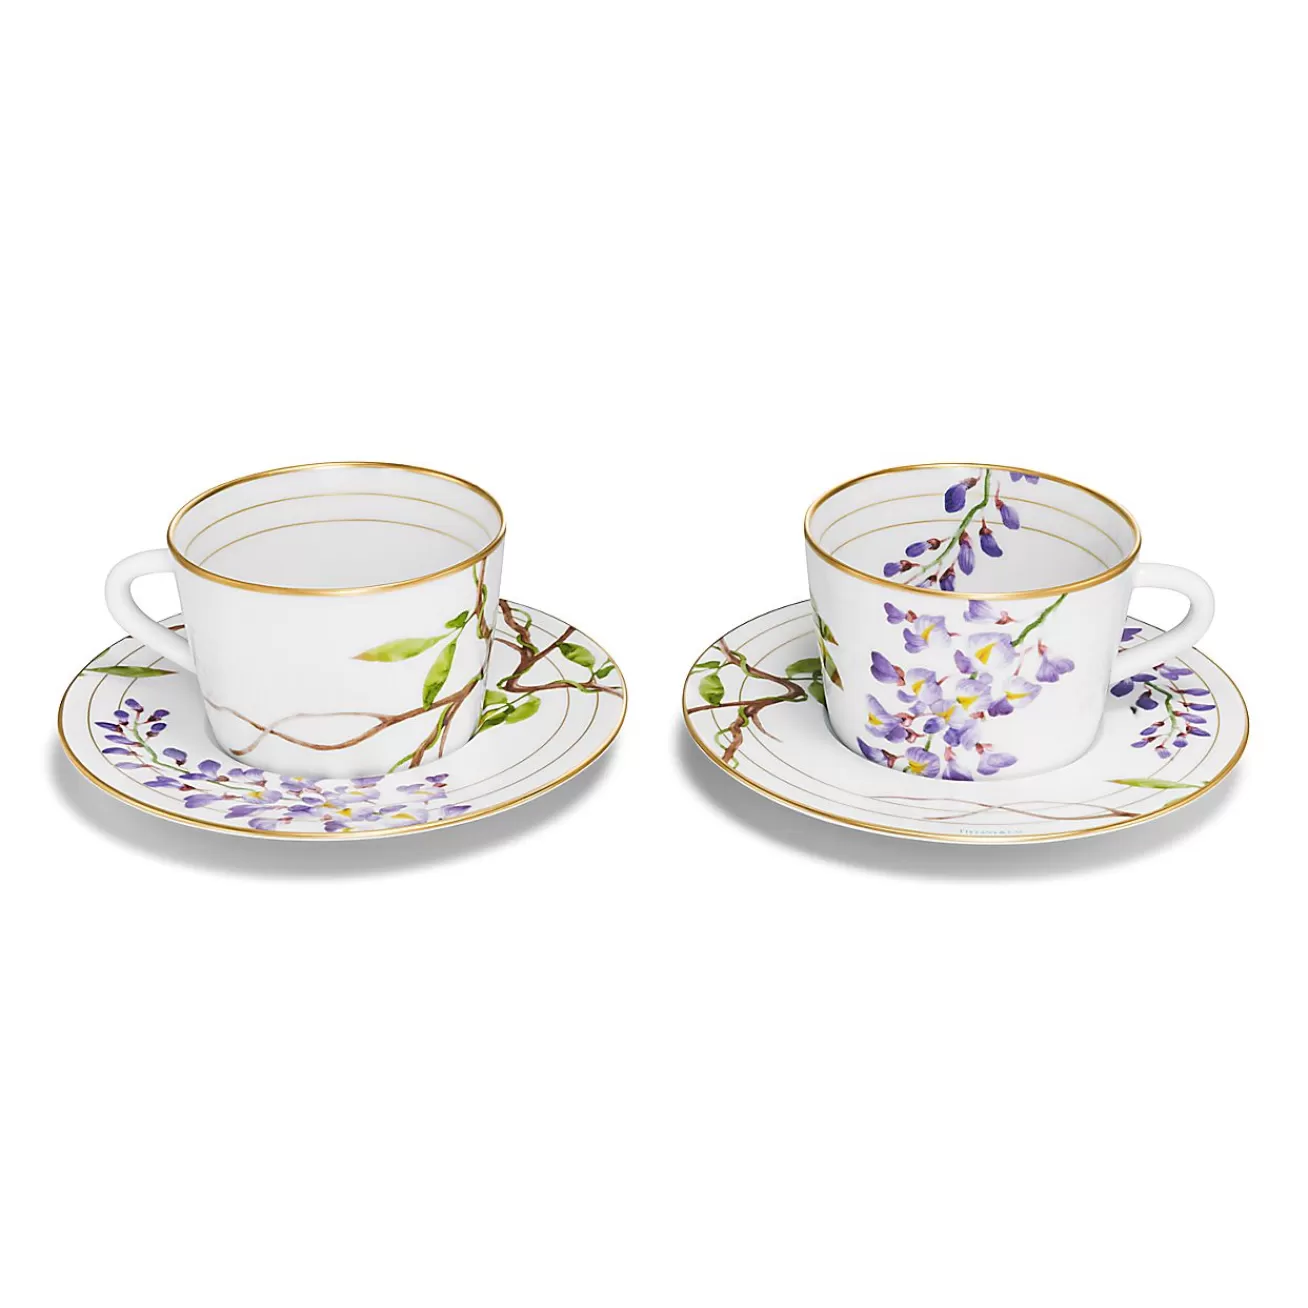 Tiffany & Co. Tiffany Wisteria Teacup and Saucer Set of Two, in Porcelain | ^ The Home | Housewarming Gifts